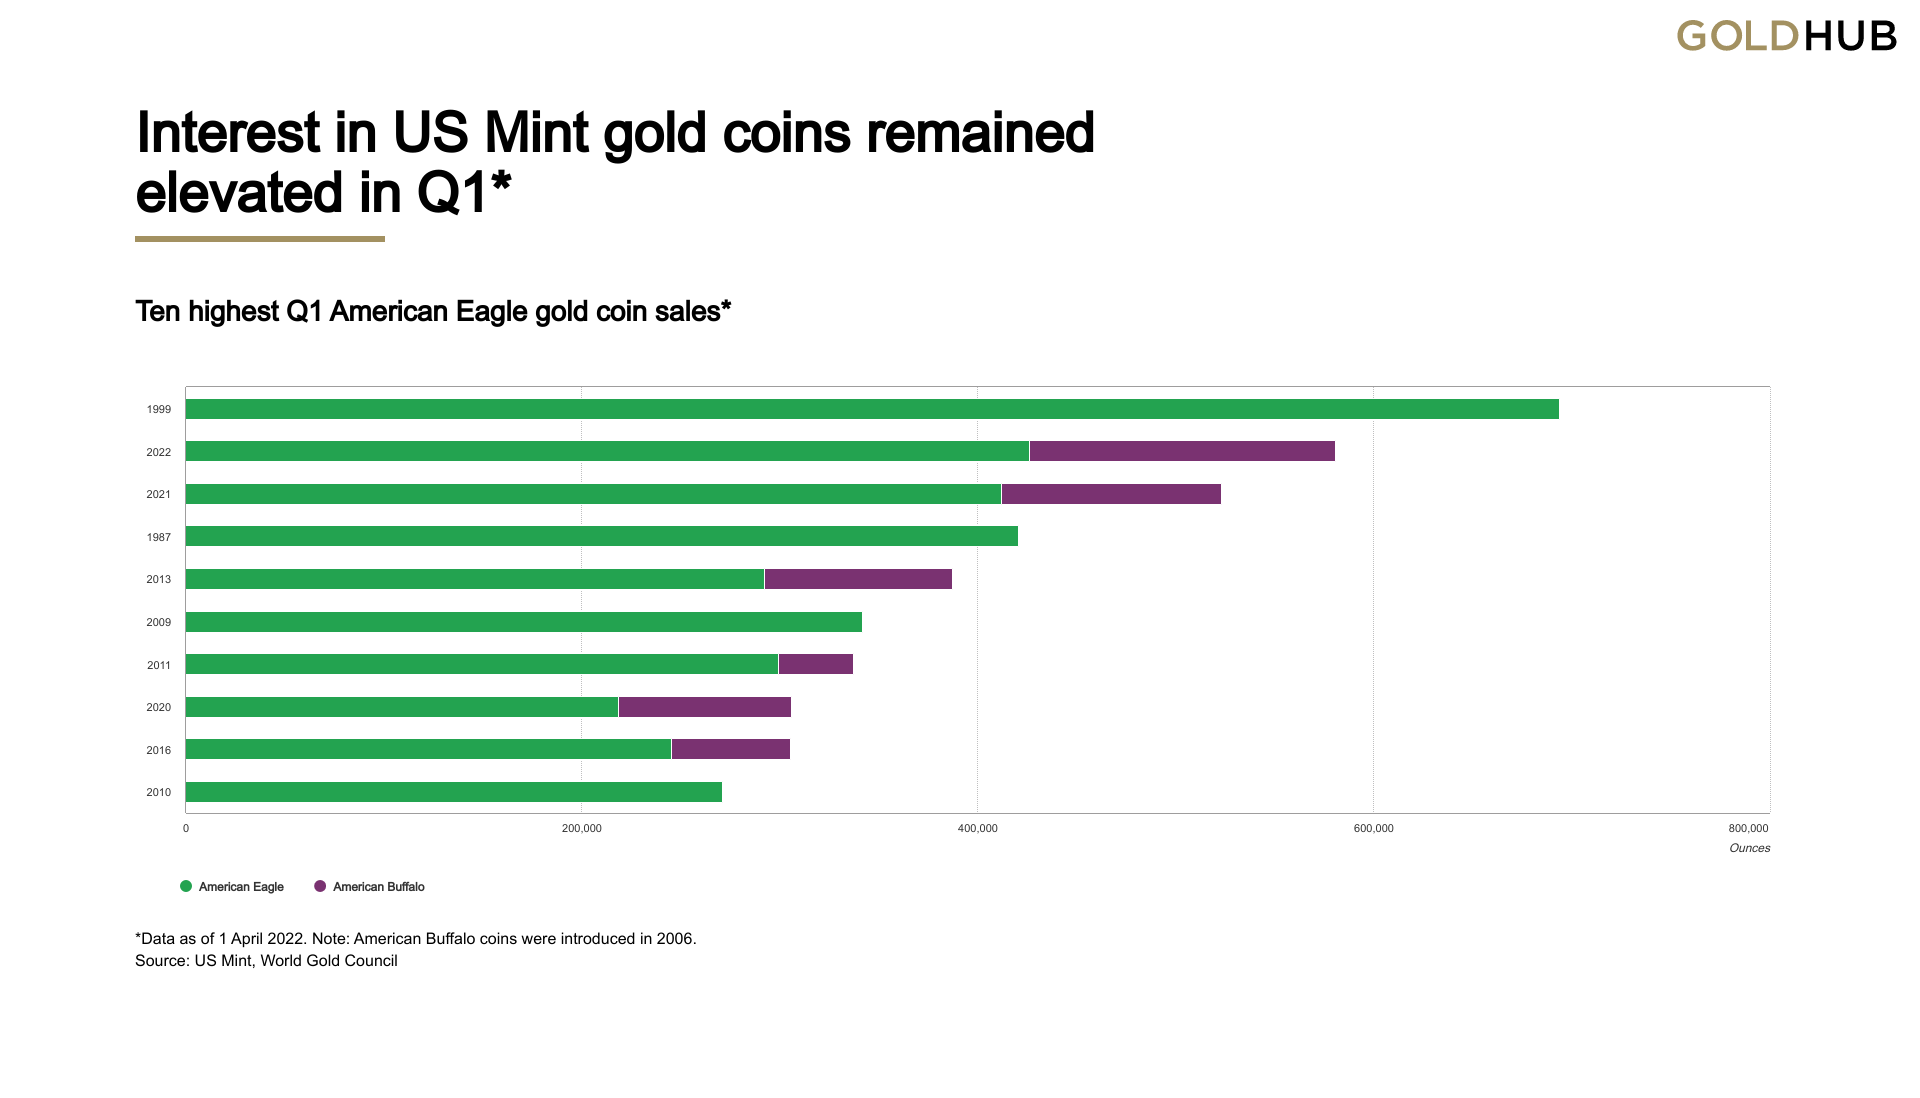 bar chart showing quarterly US Mint gold coin sales